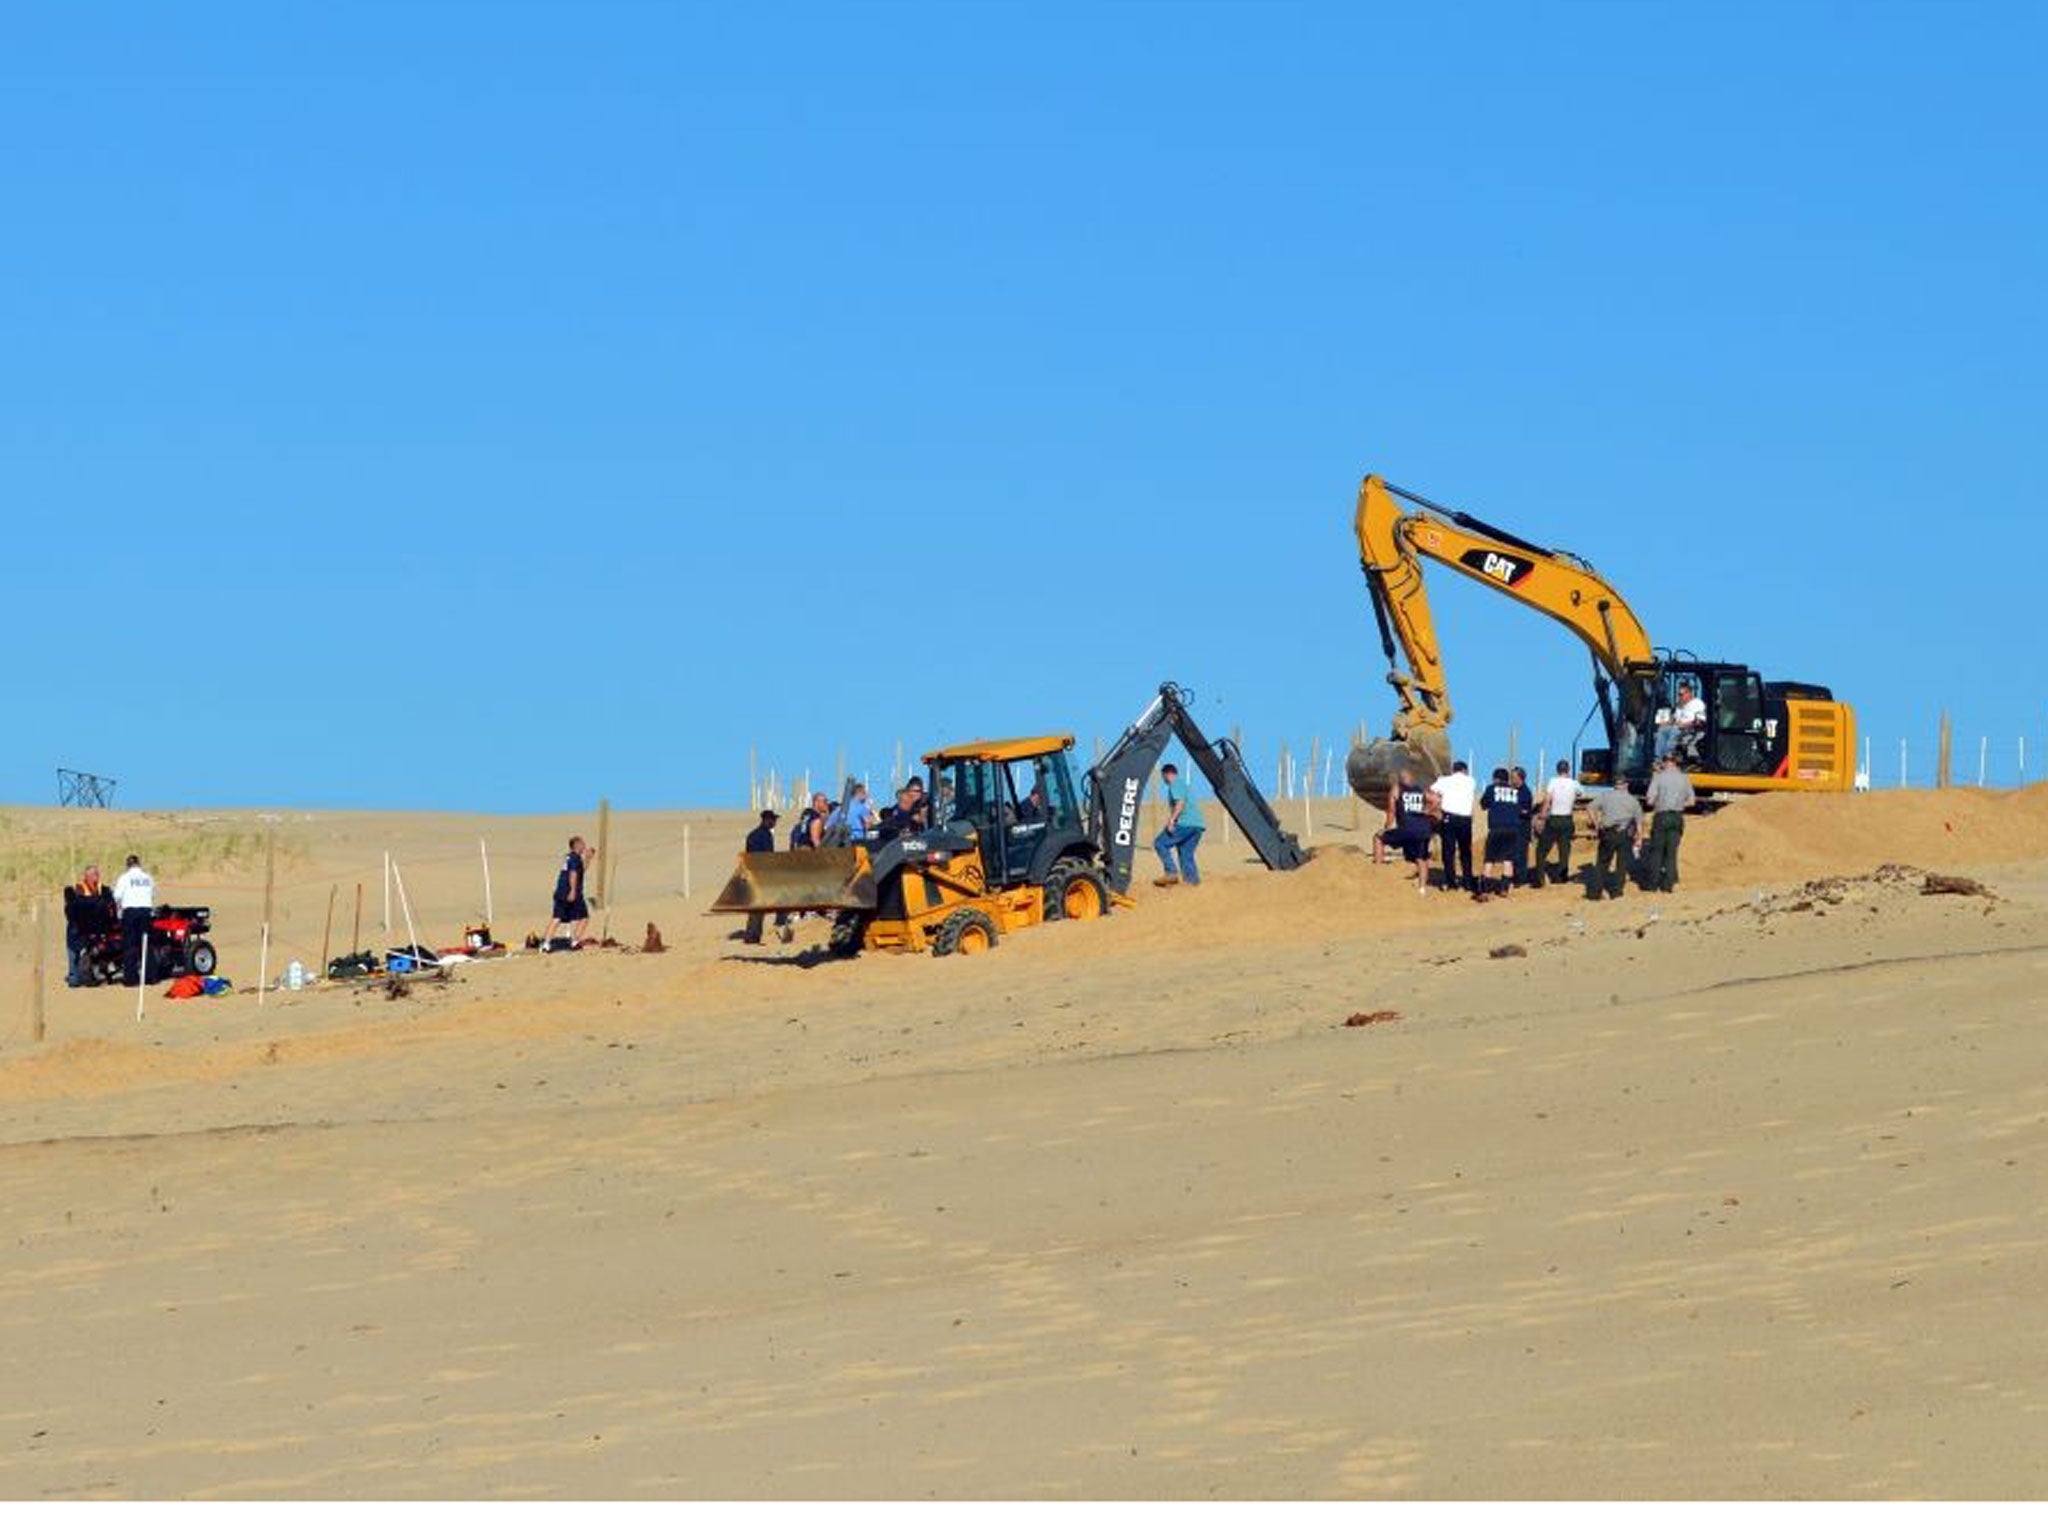 Firefighters, police and first responders spent three hours digging to rescue a six-year-old boy trapped by a sand dune